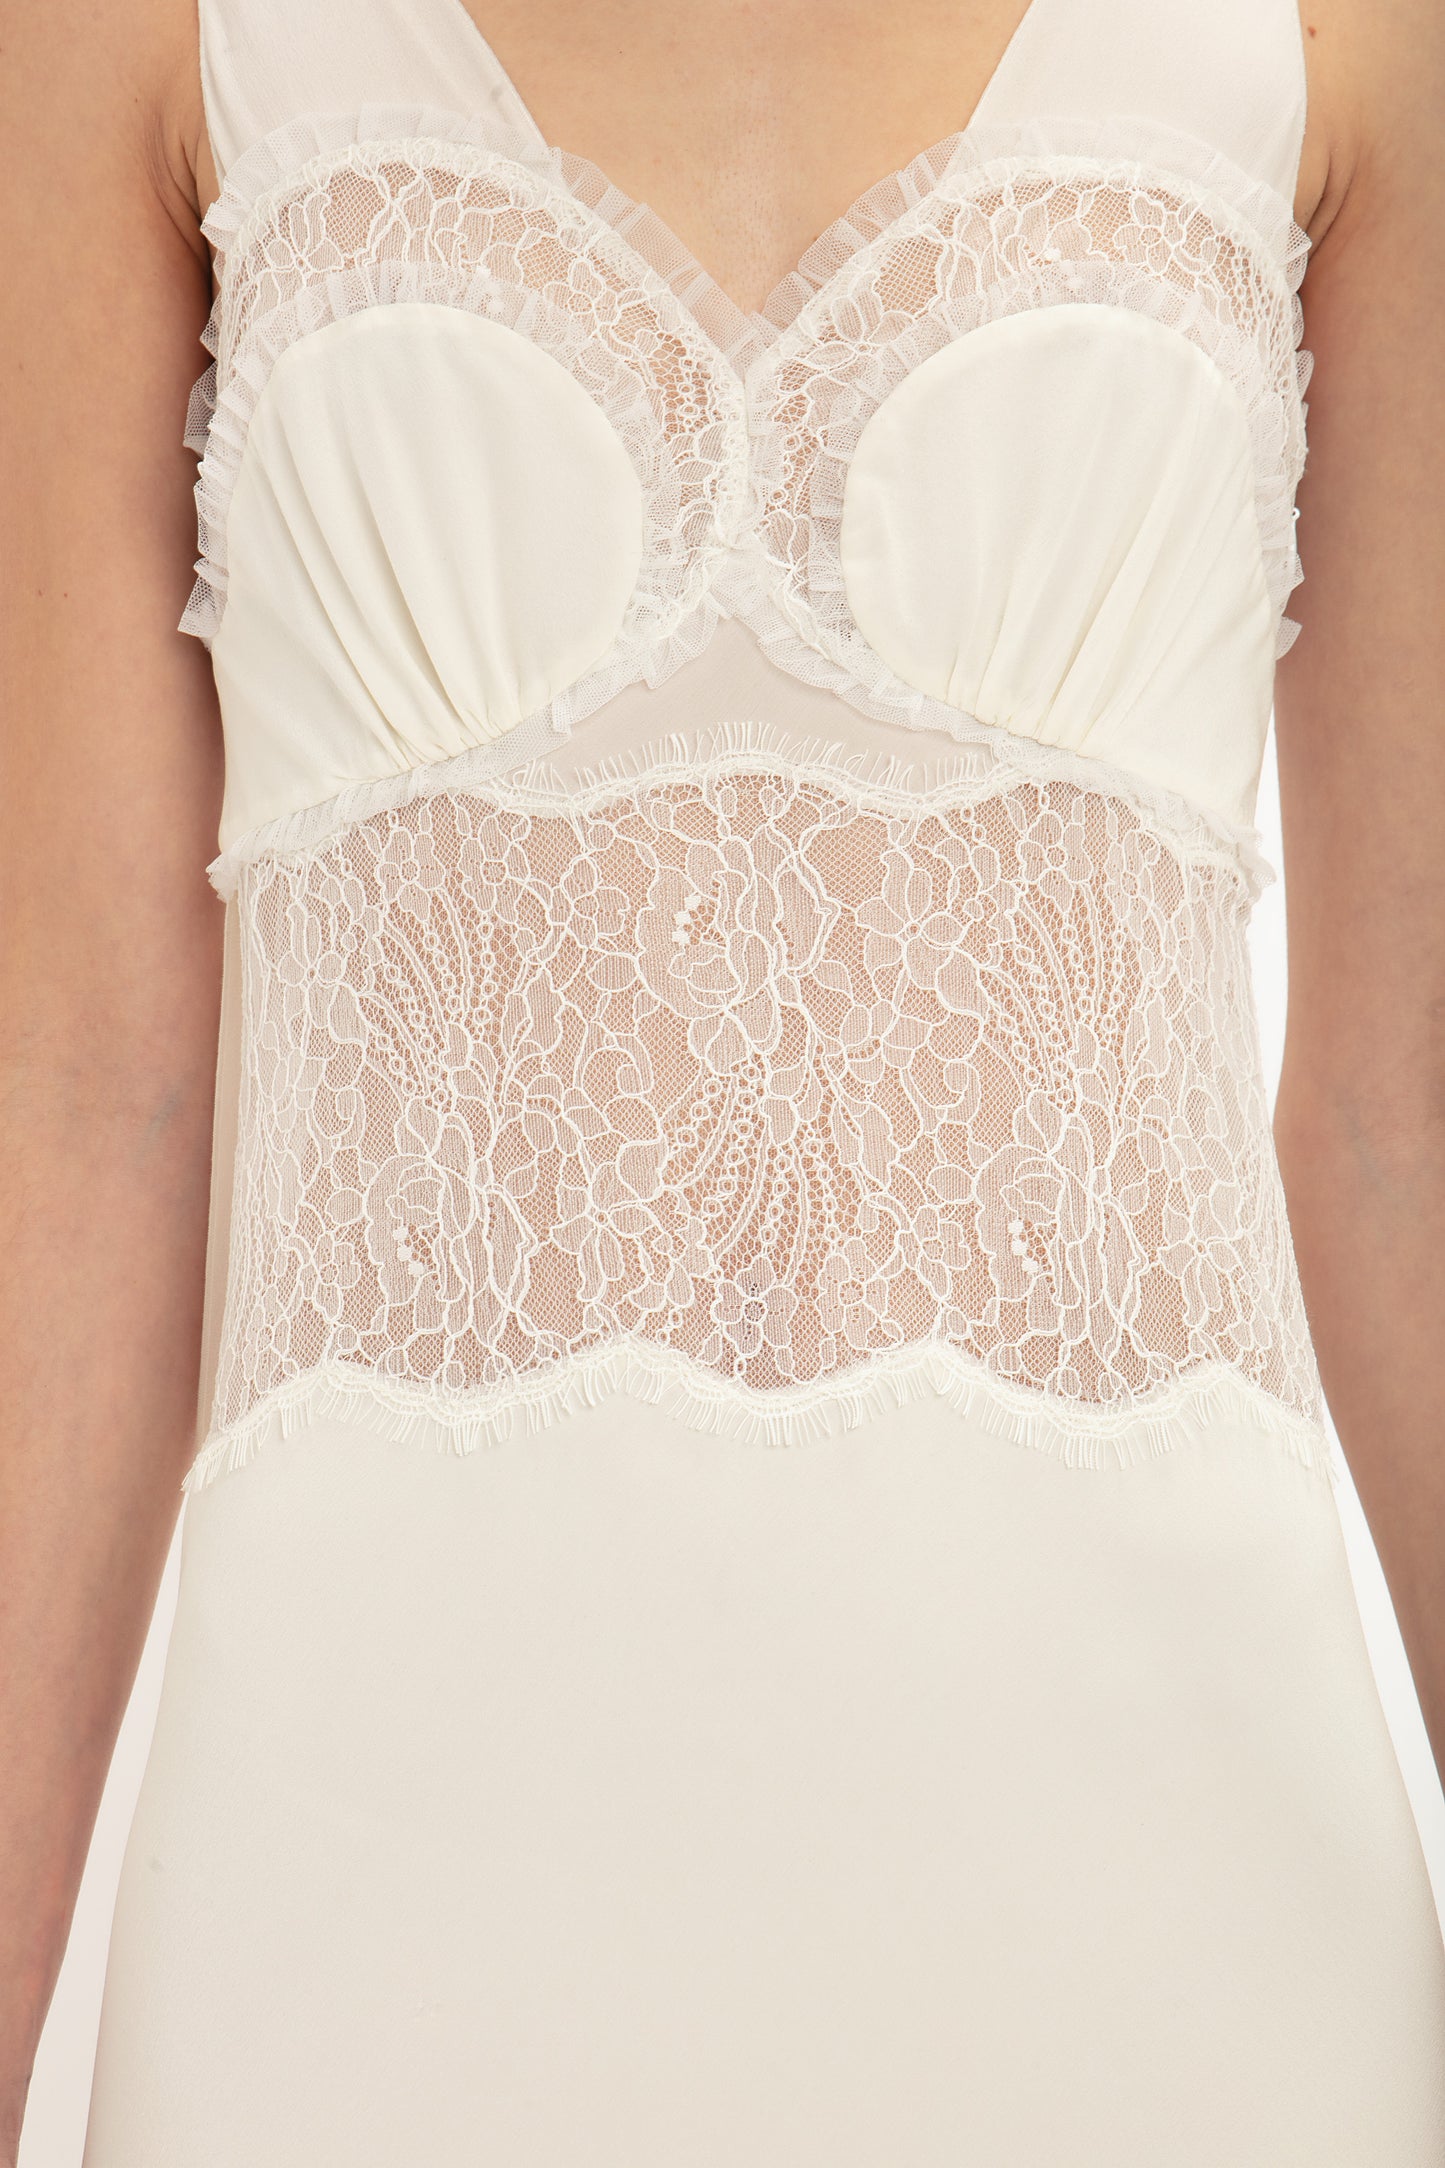 Close-up of a person wearing the Ruffle Detail Midi Dress In Ivory by Victoria Beckham, which features sheer, tactile lace detailing on the bodice and straps. The lace features a floral pattern.